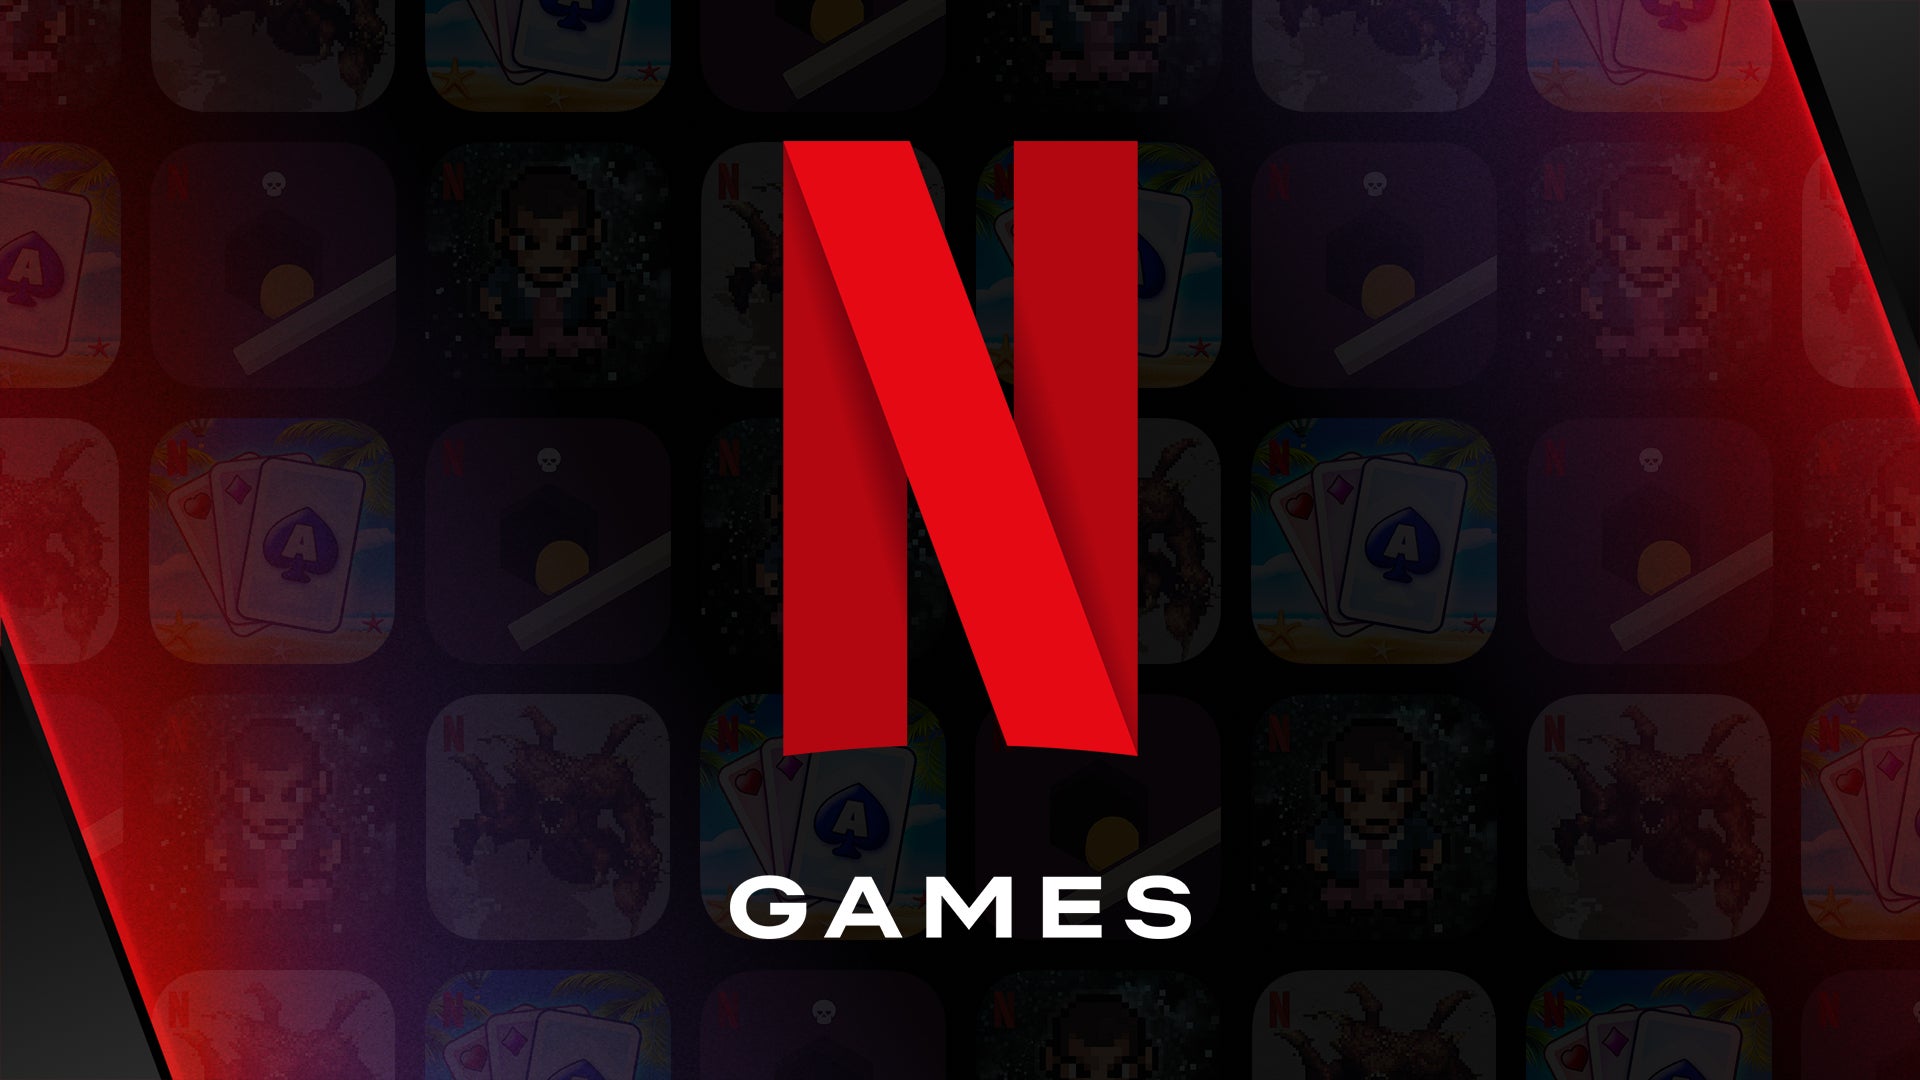 Gaming Giant Take-Two CEO Shows Enthusiasm for Increased Netflix Integration